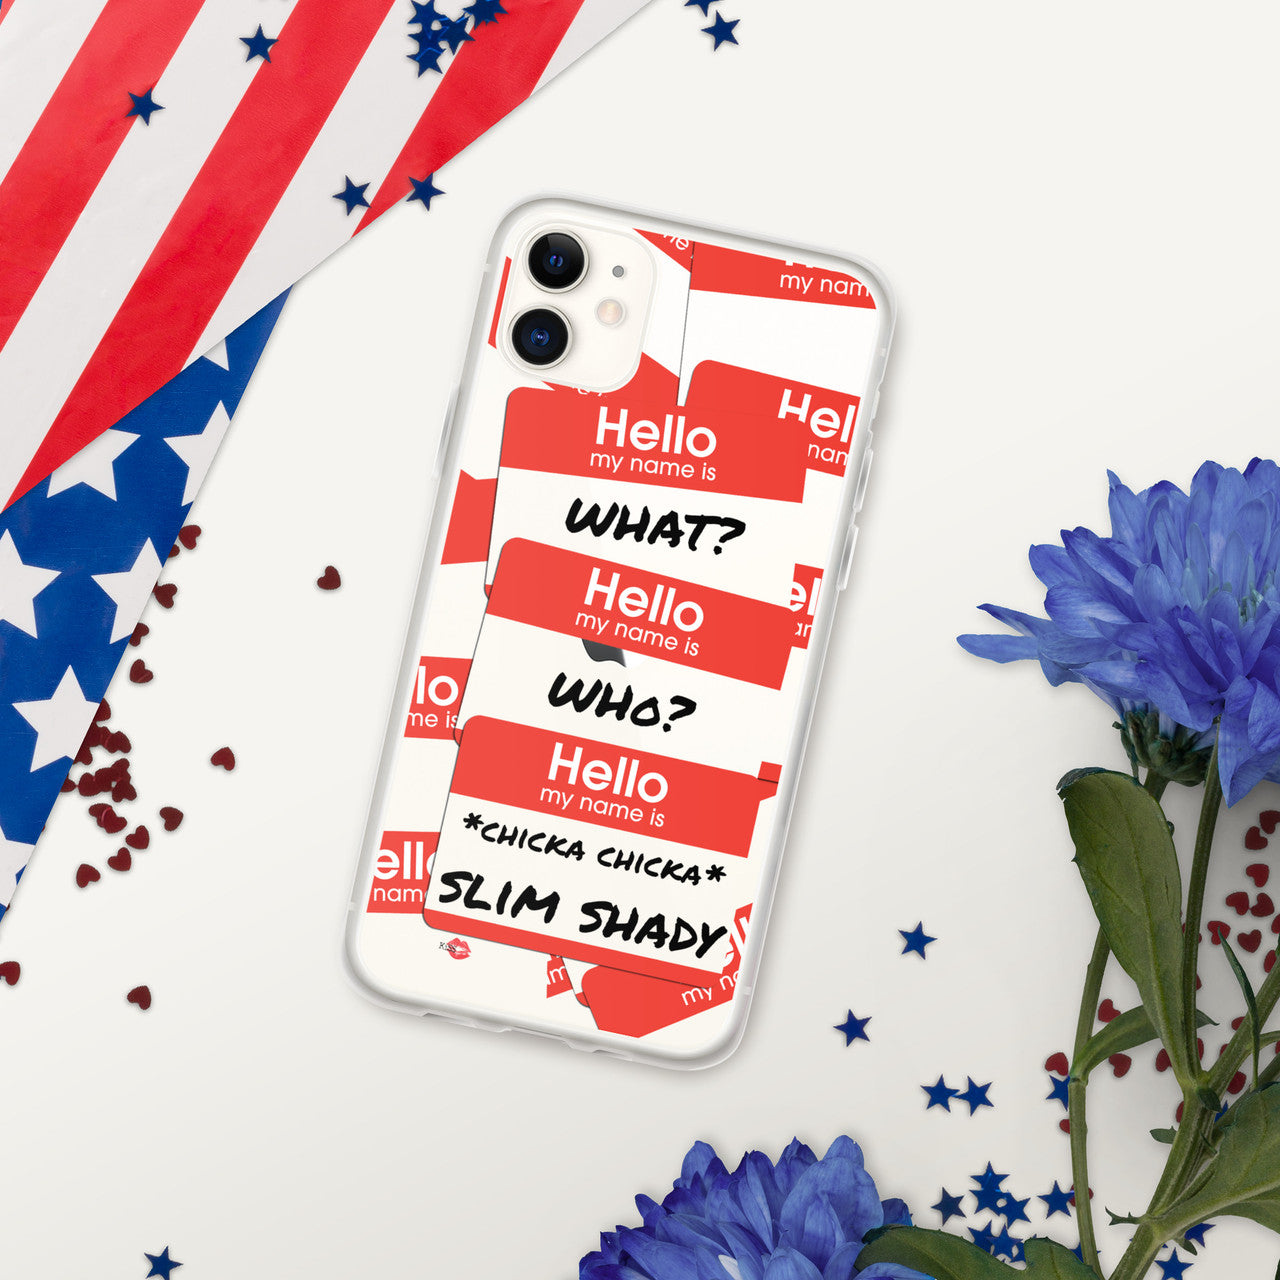 Hi My Name Is… KiSS Clear Case for iPhone - Slim Shady music